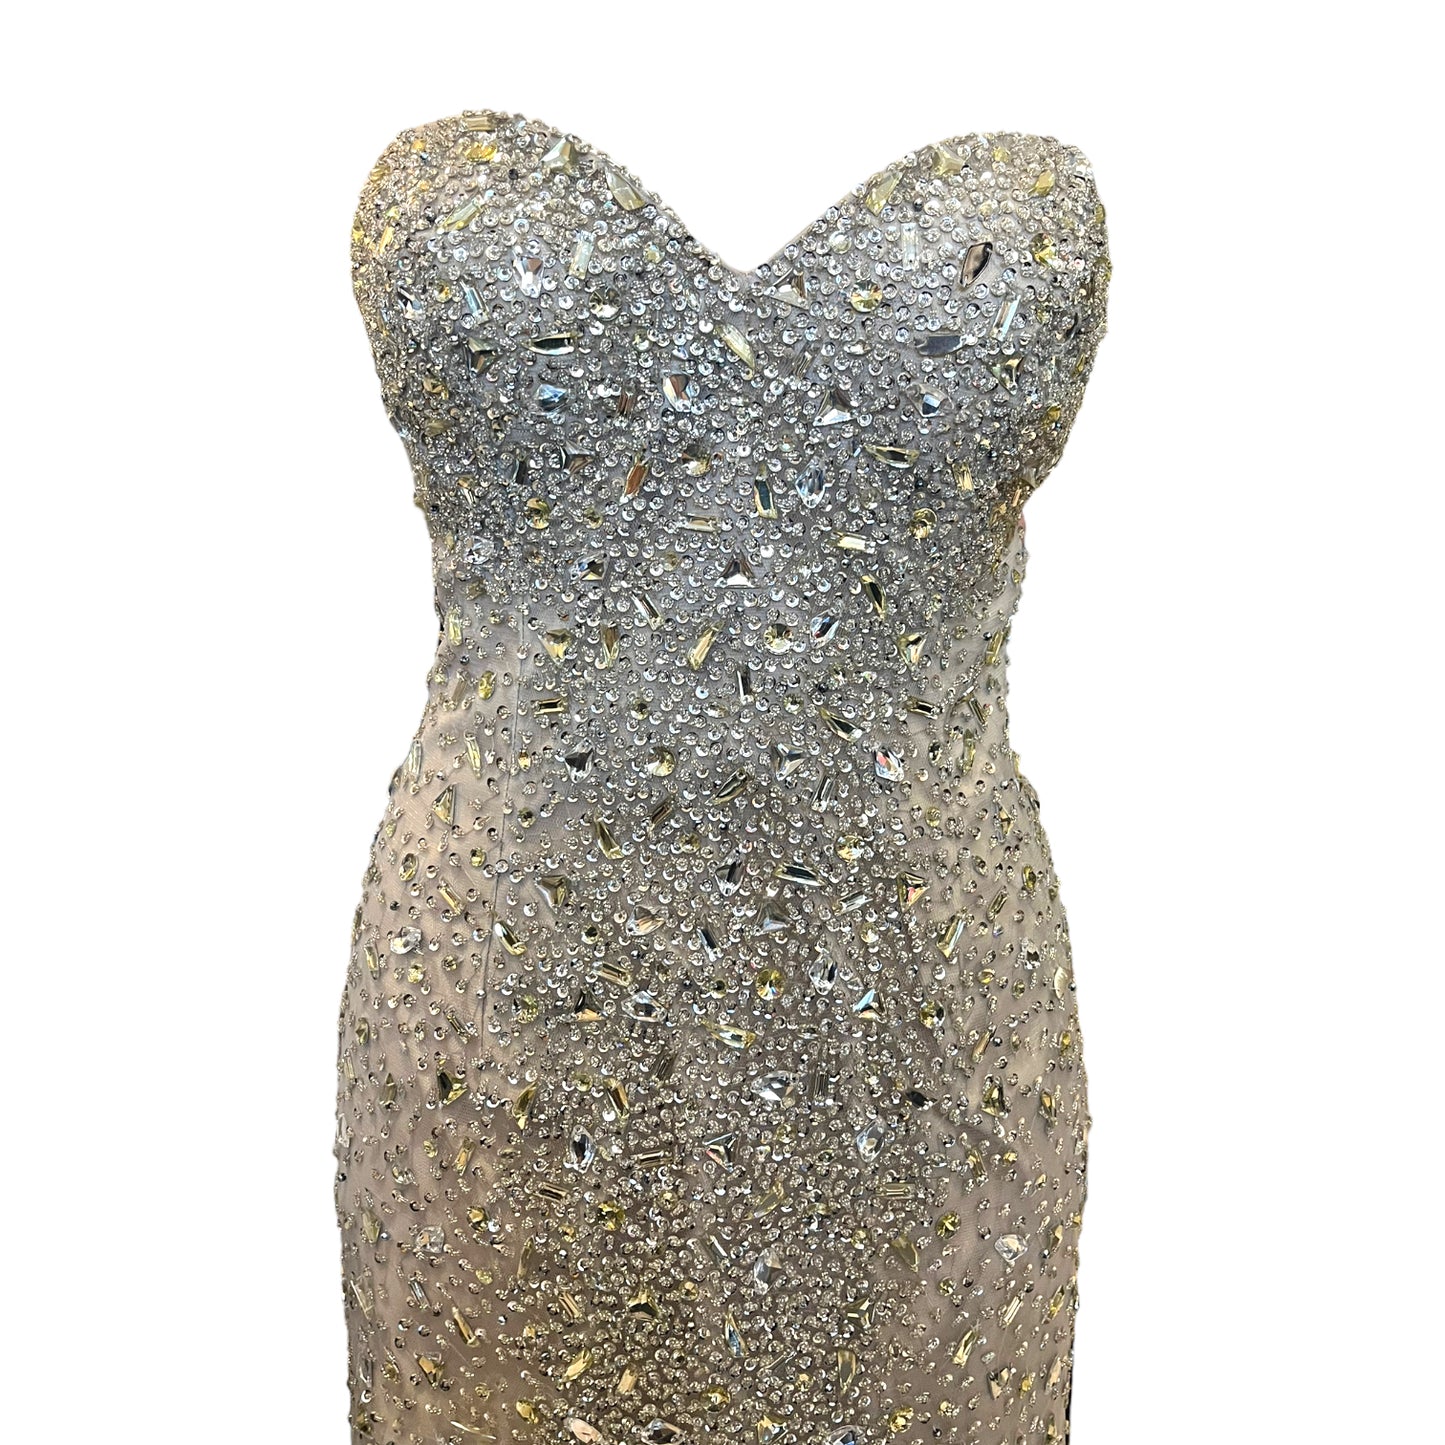 NEW Terani Couture Embellished Dress